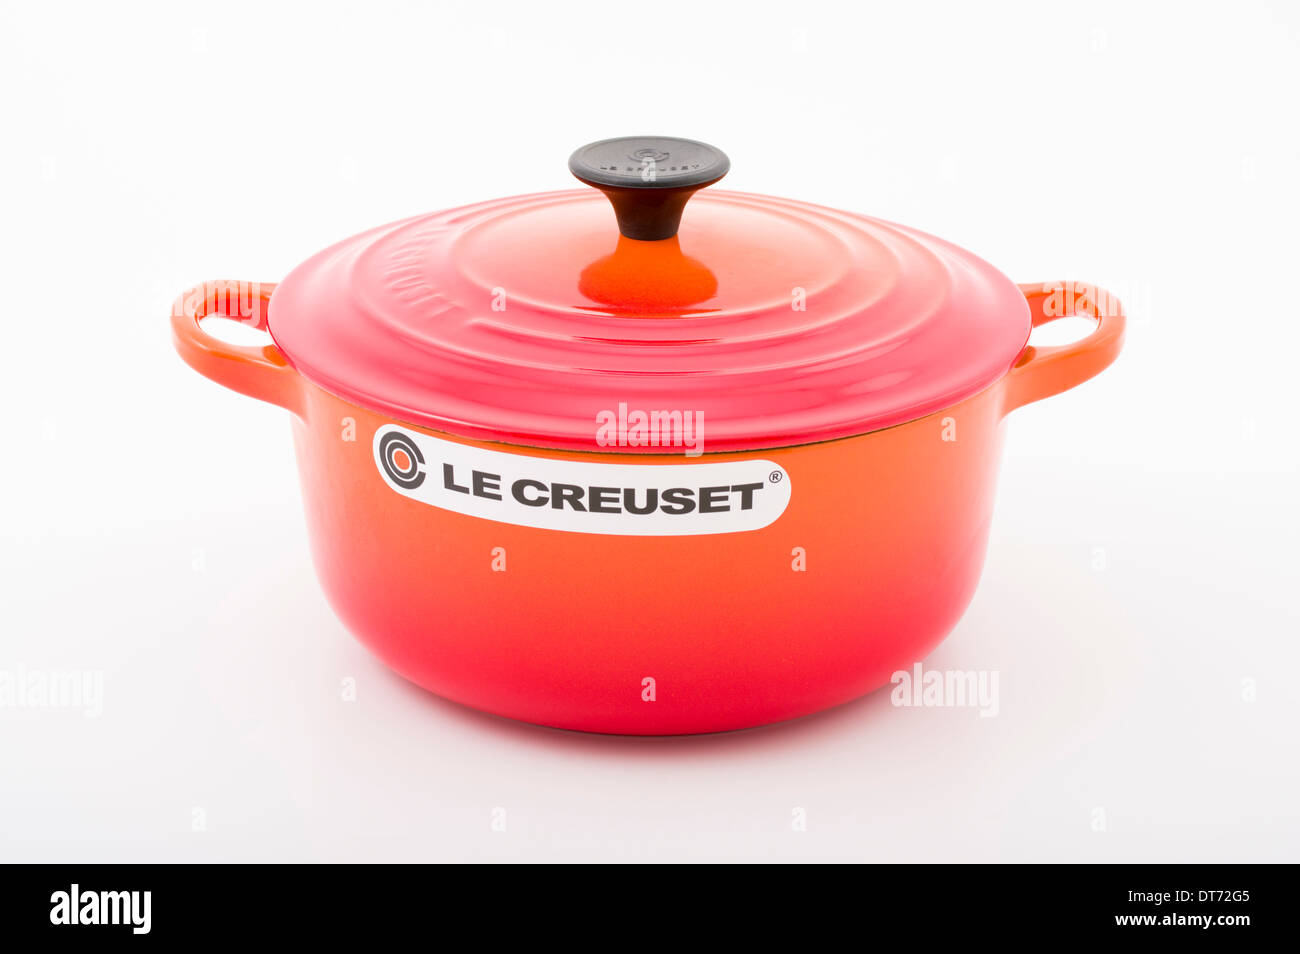 Le Creuset cast iron cast-iron French cookware with orange enamel. French  oven / Casserole dish Stock Photo - Alamy